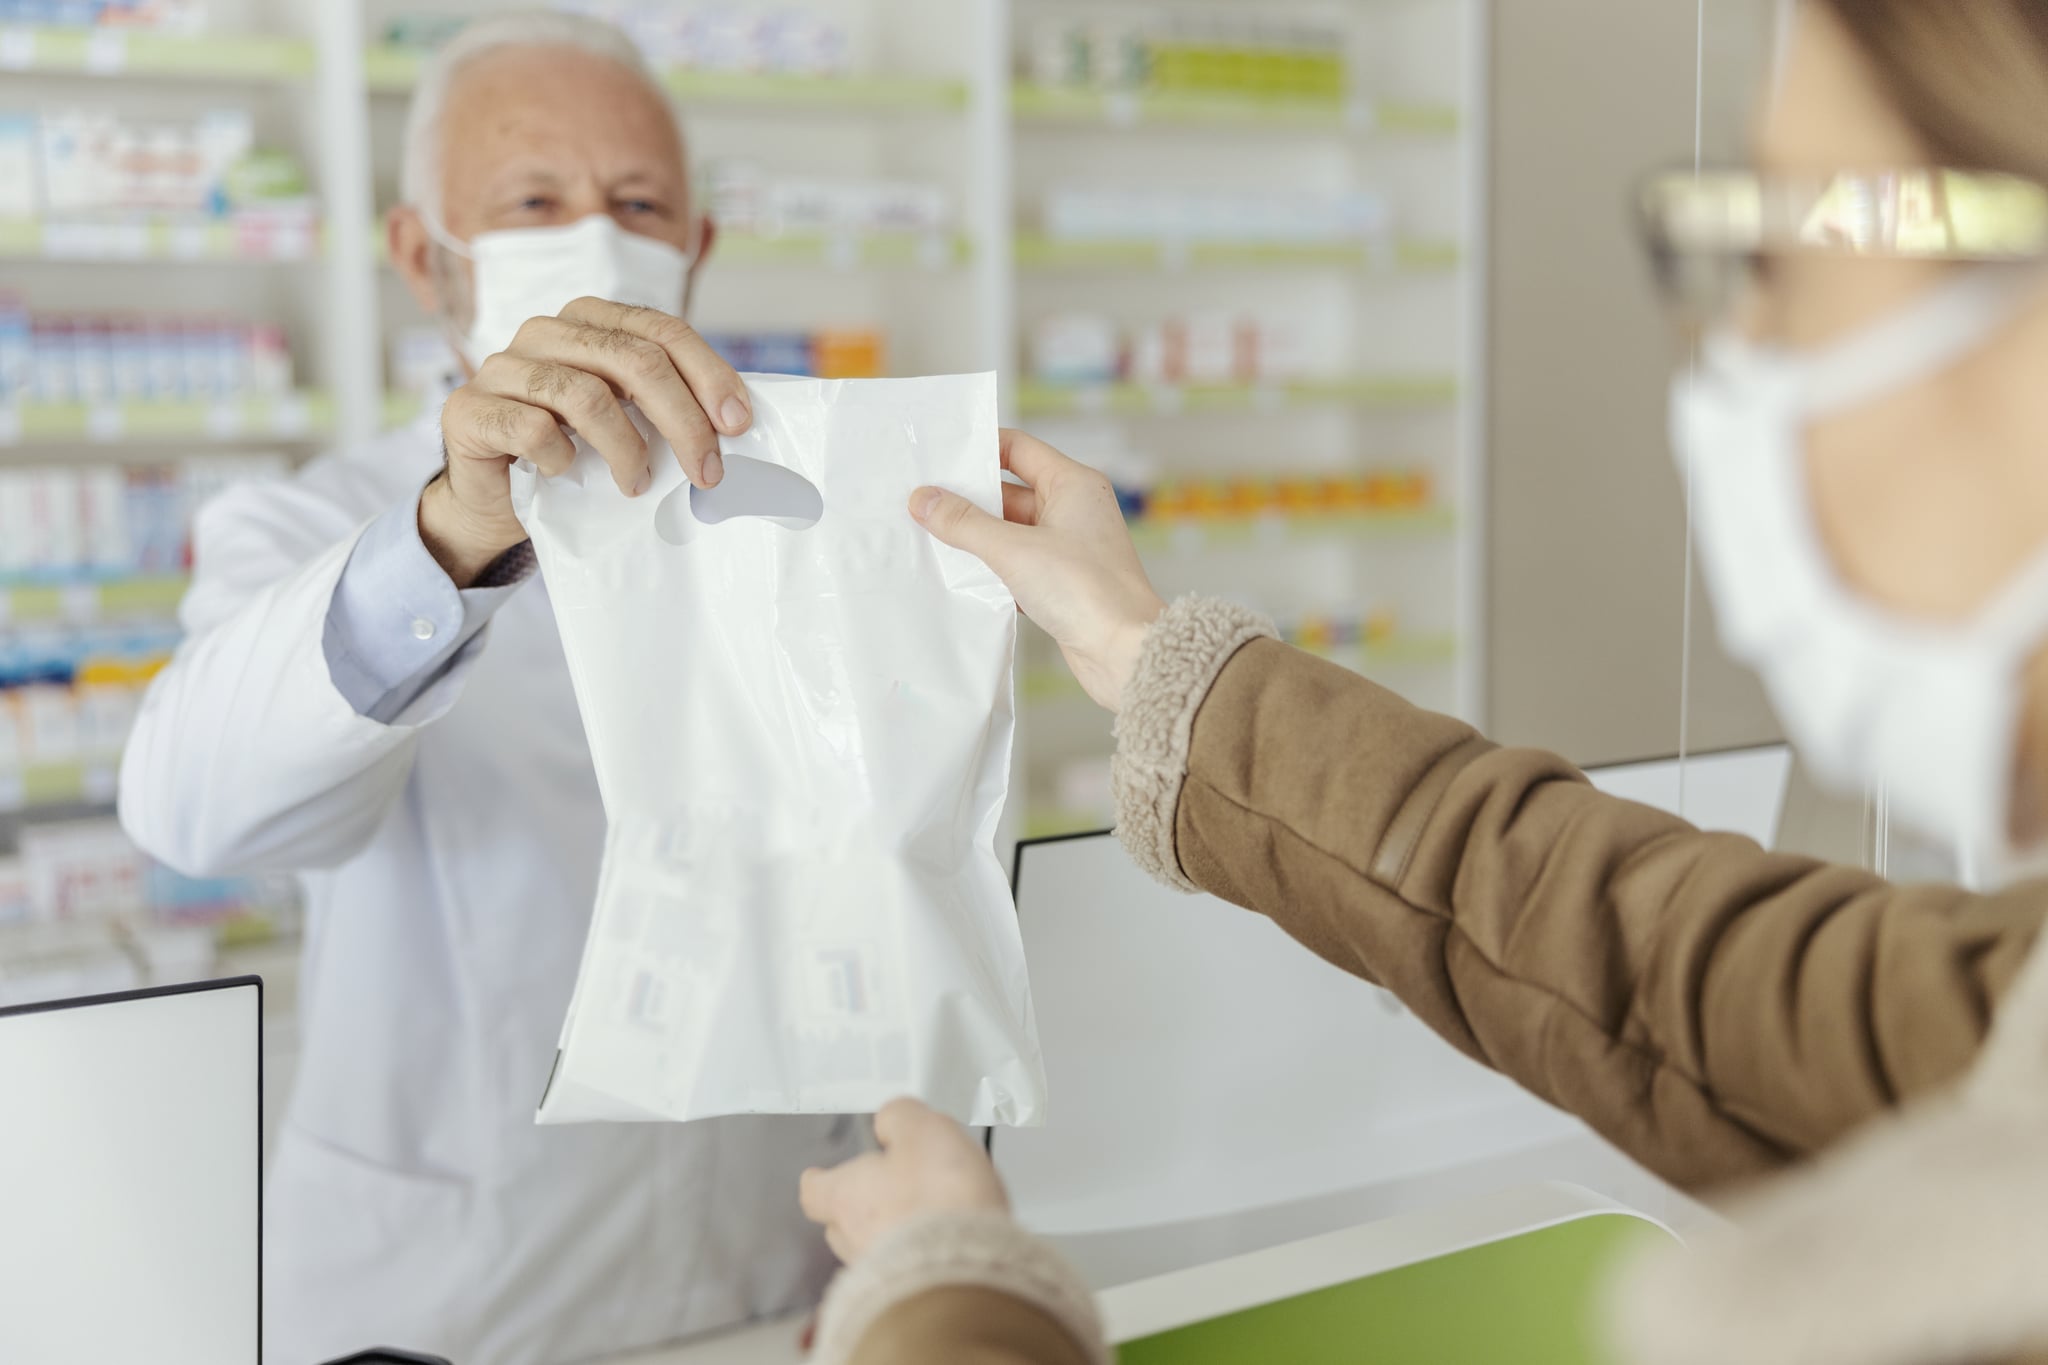 Sale of prescription drugs. An elderly male pharmacist and dressed in a white uniform with a protective mask on his face in a plastic bag of medicines and supplements delivered to the customer